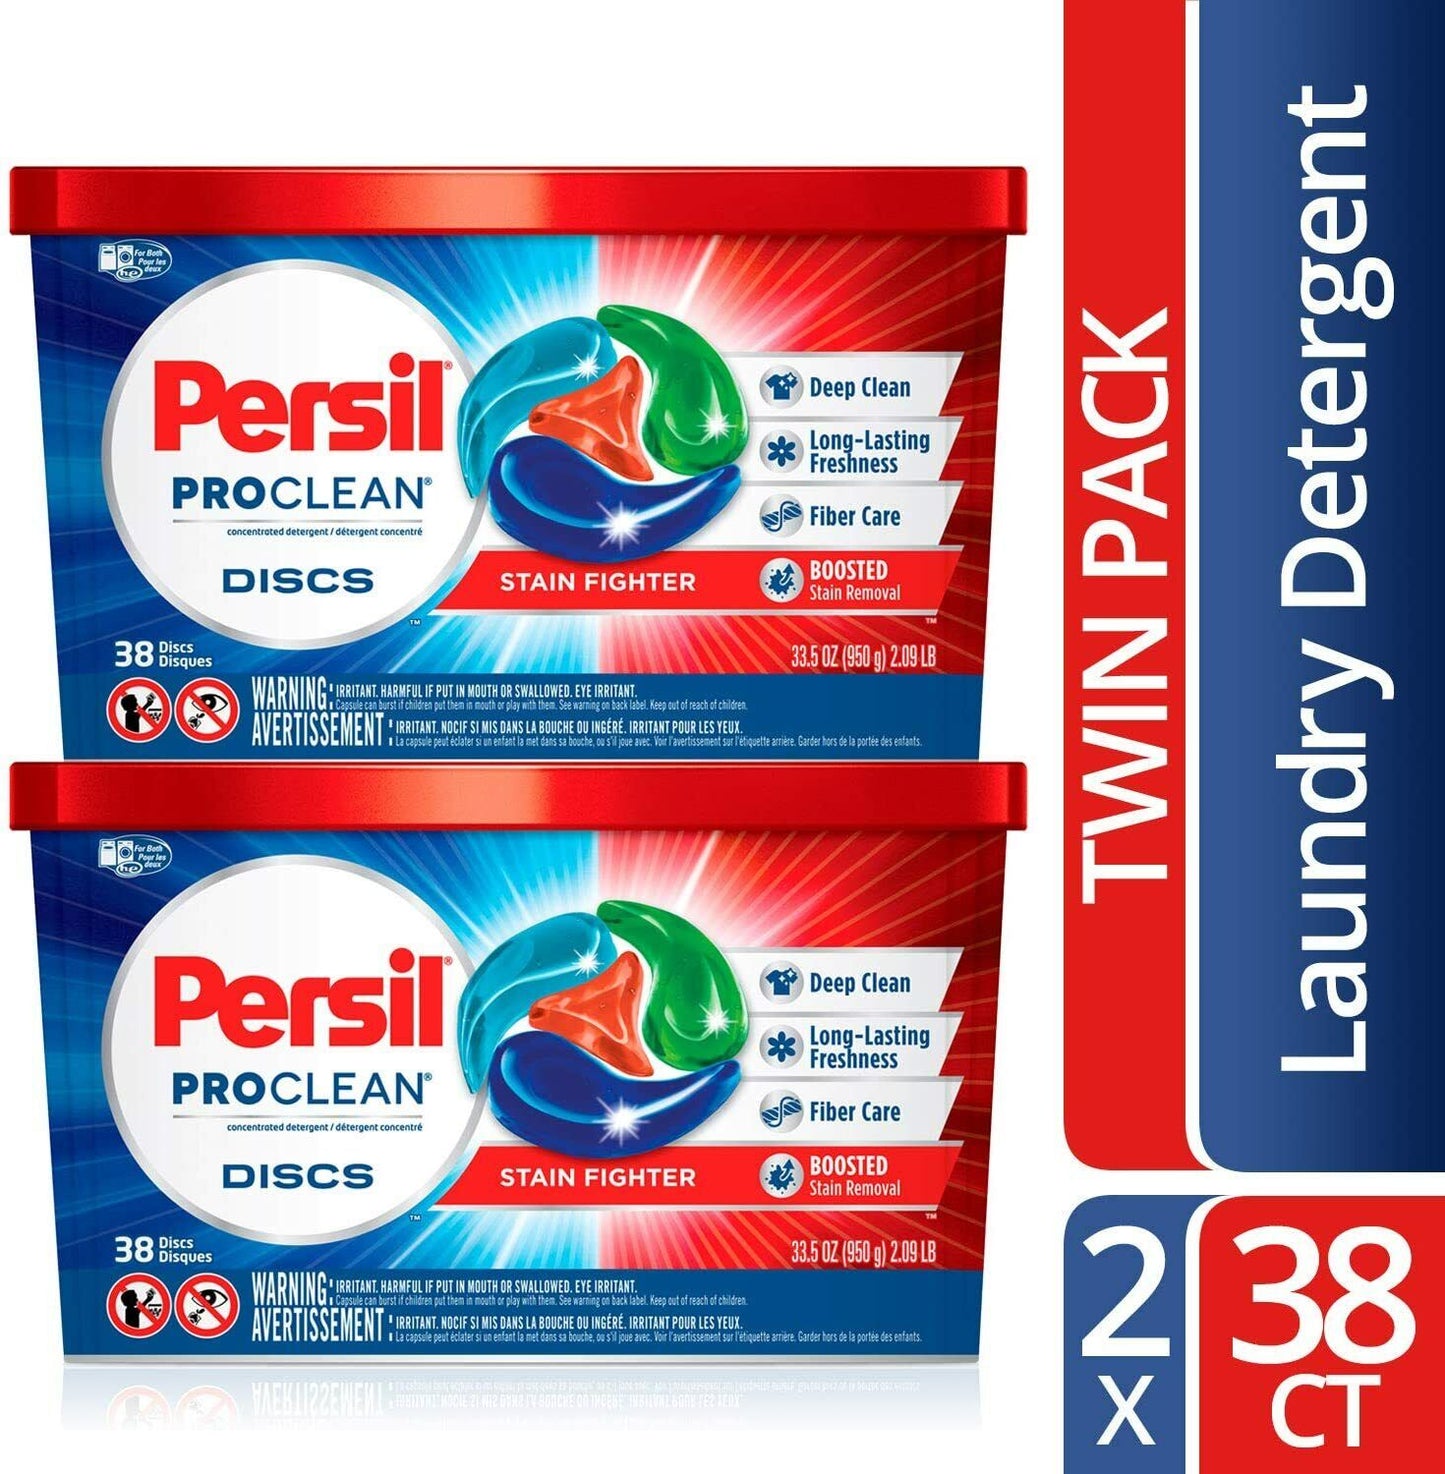 Persil ProClean Discs Laundry Detergent Original & Stain Fighter Pods